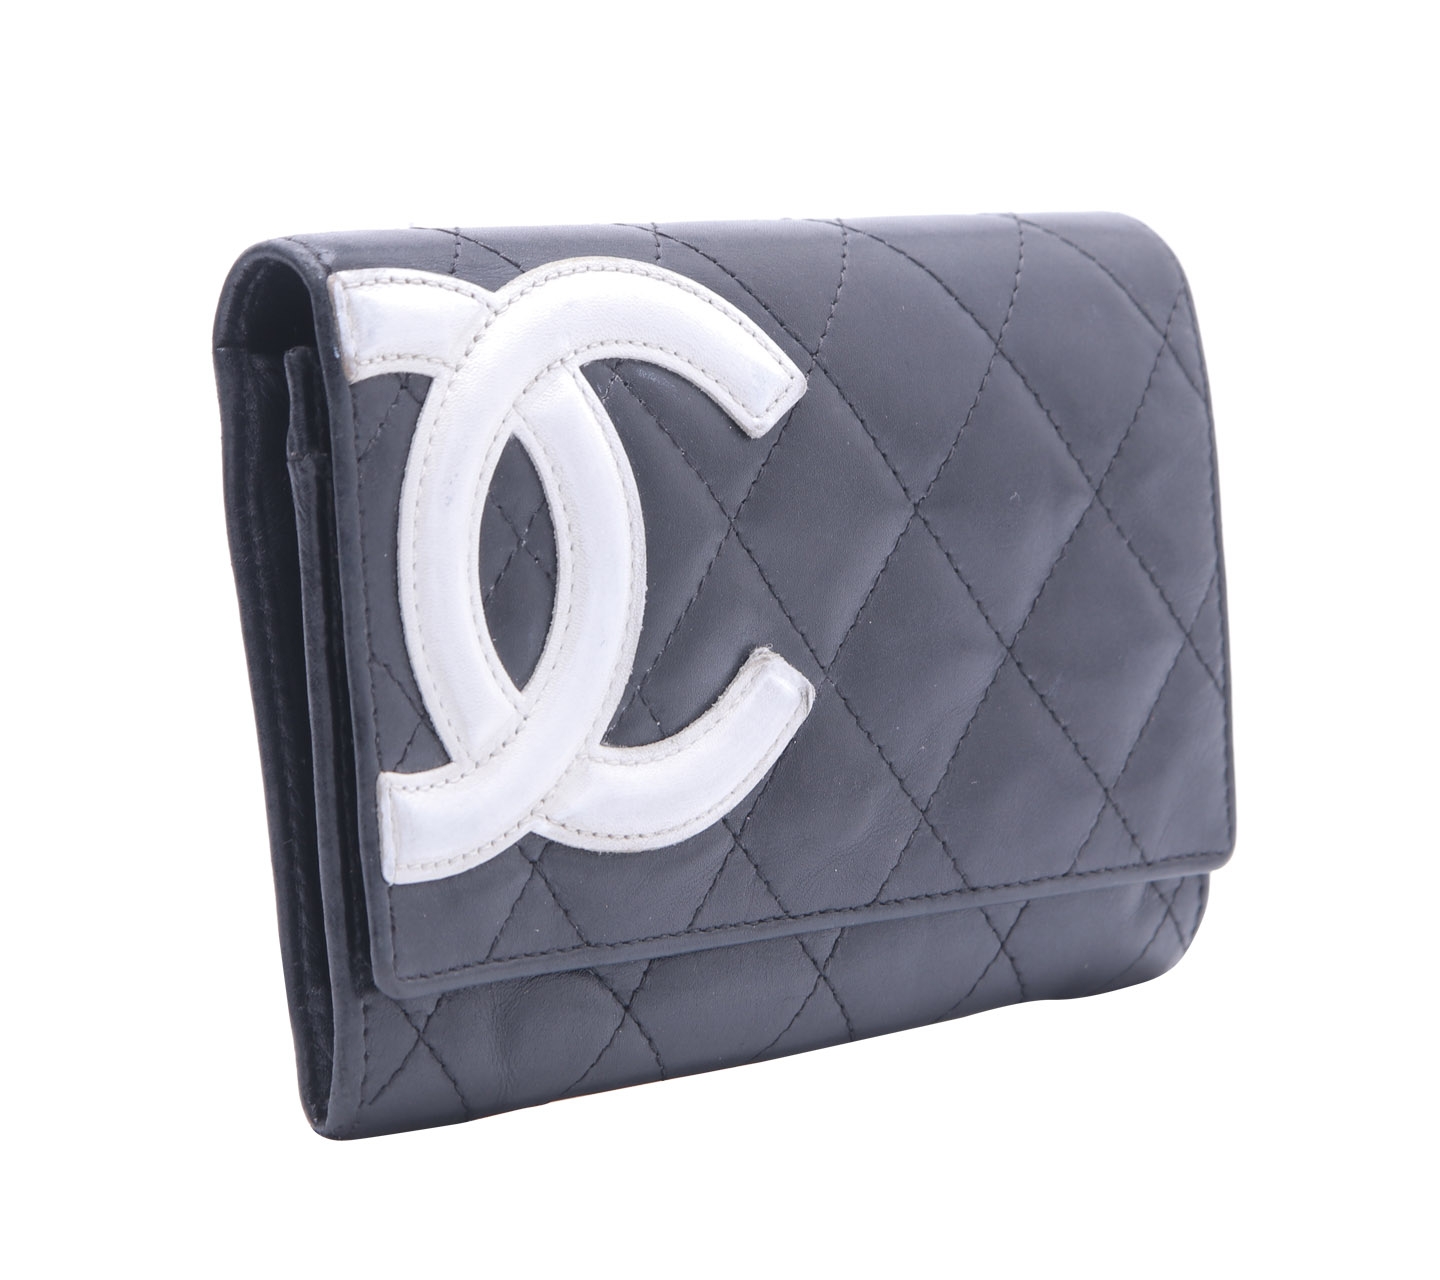 Chanel Flower Black Quilted Wallet